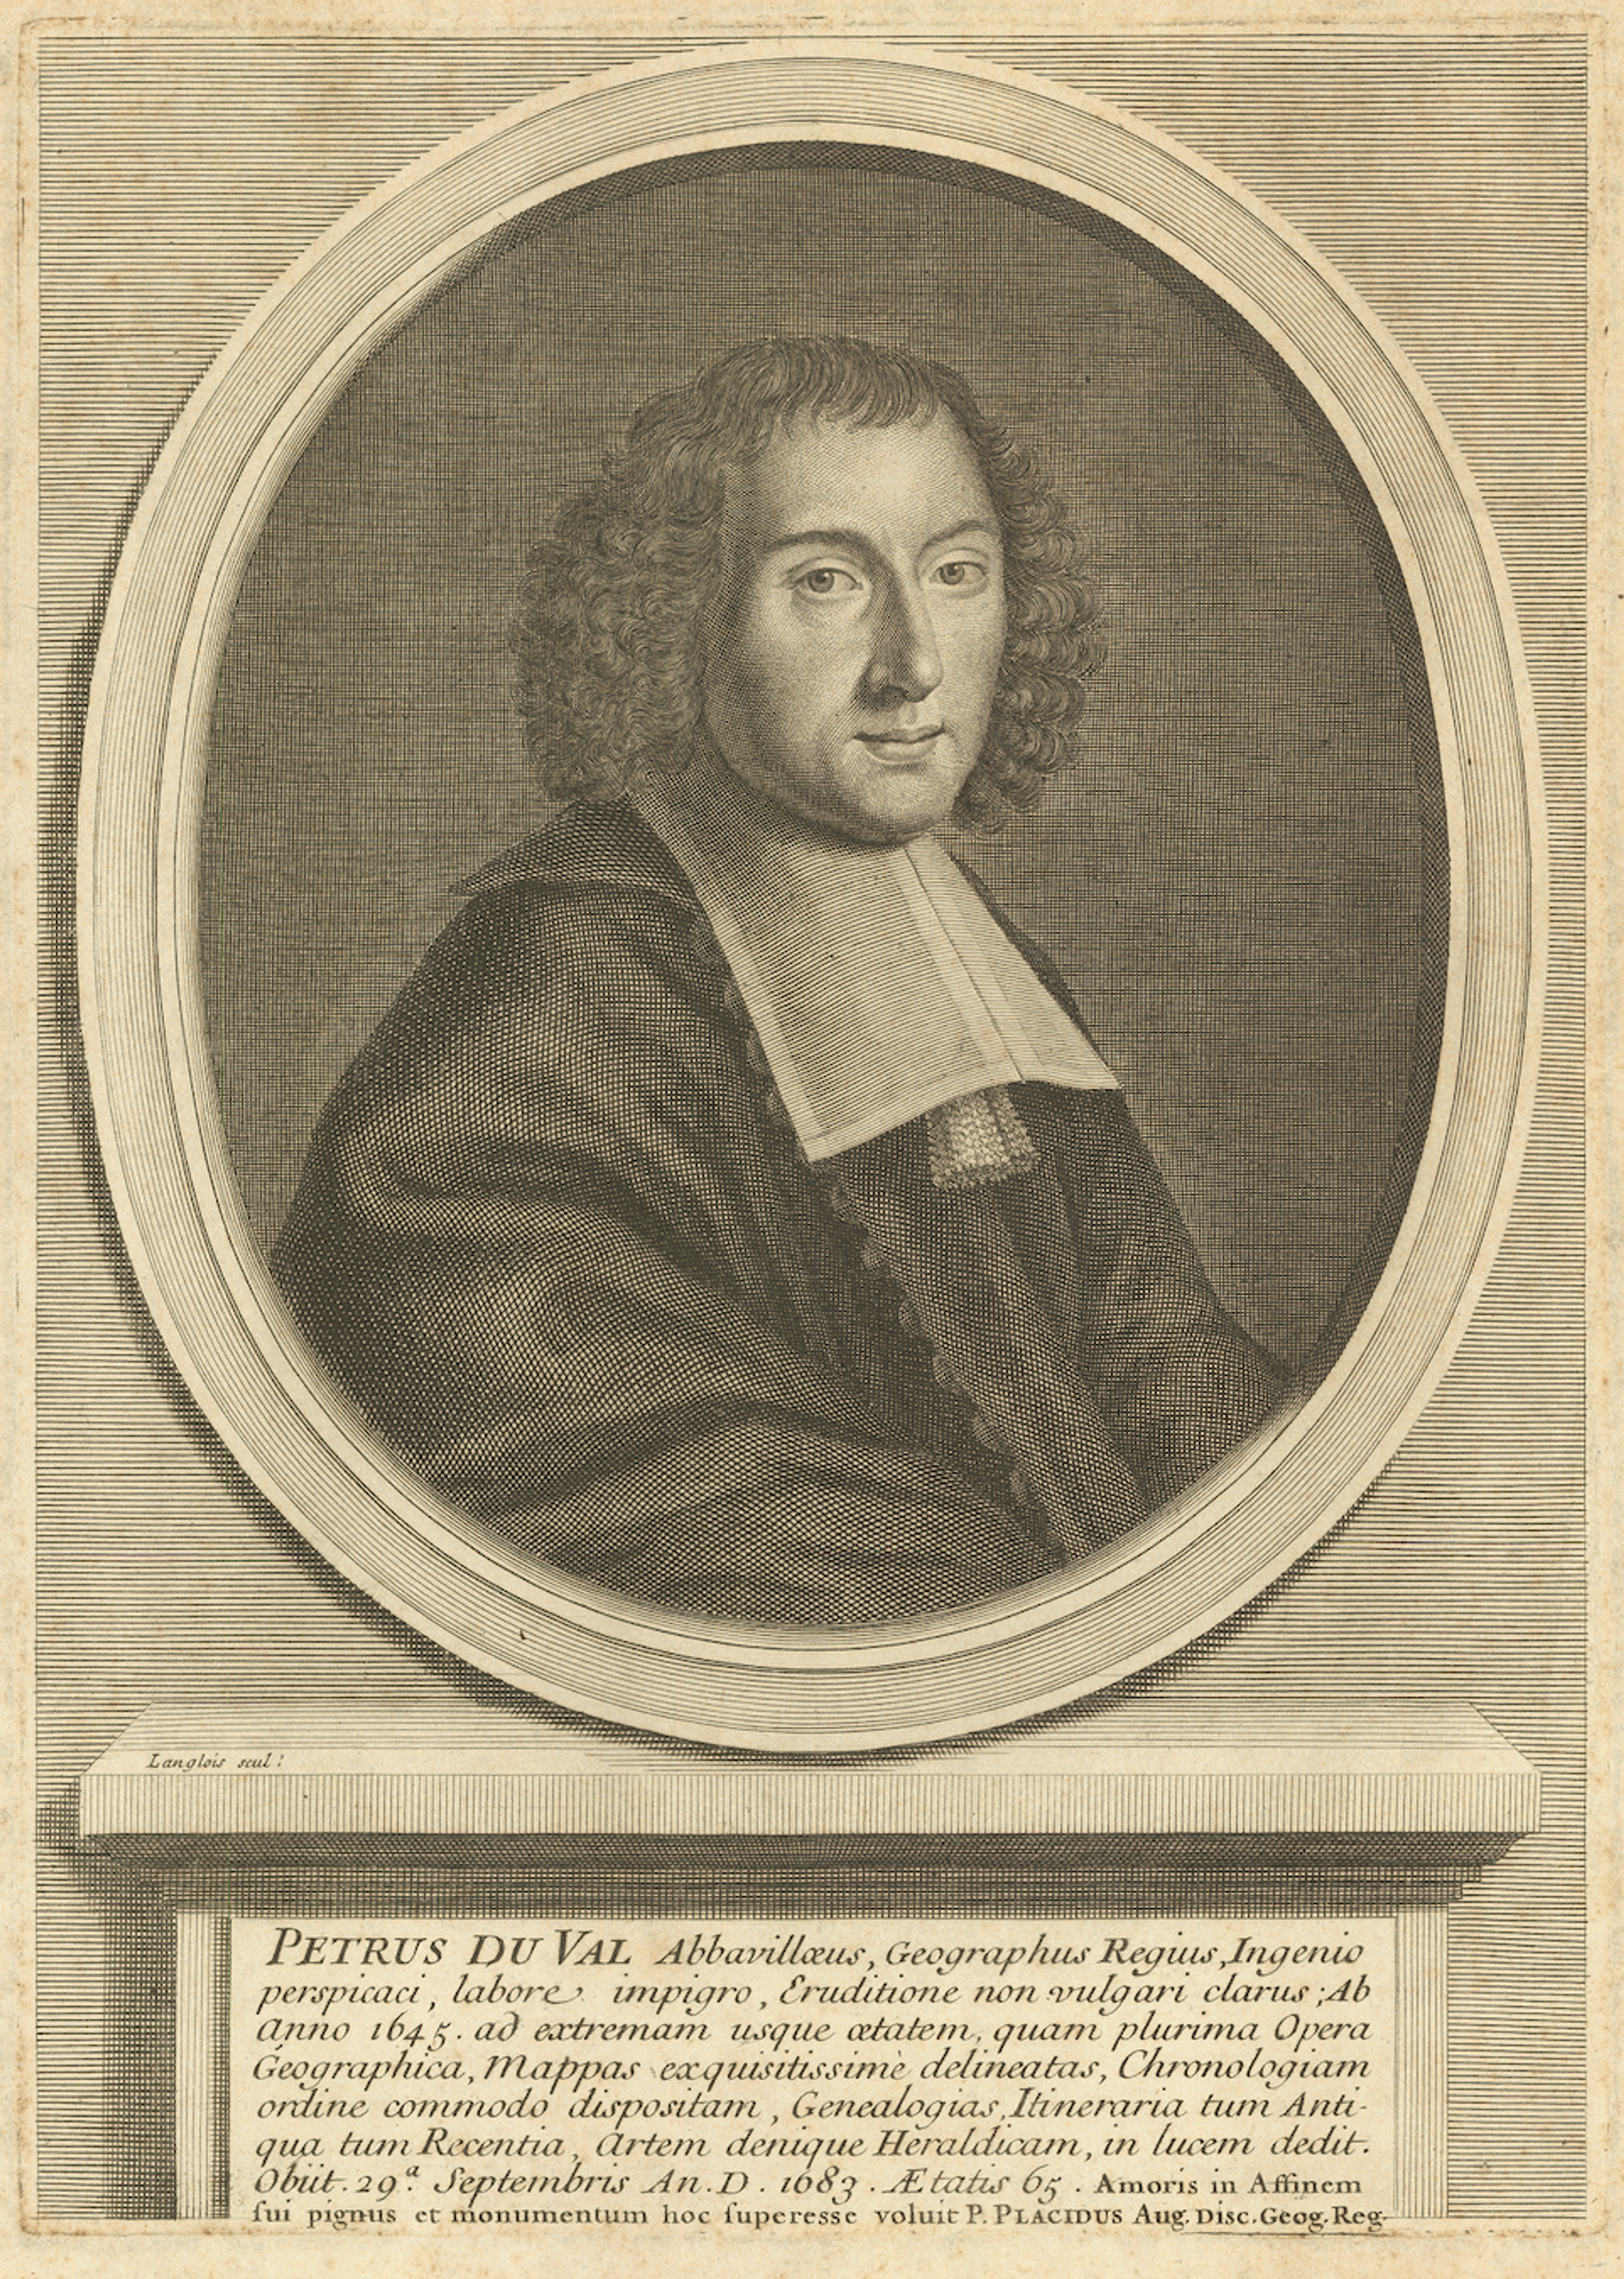 Black and white portrait of Pierre Duval, a man with shoulder length curly brown hair, wearing dark robes.